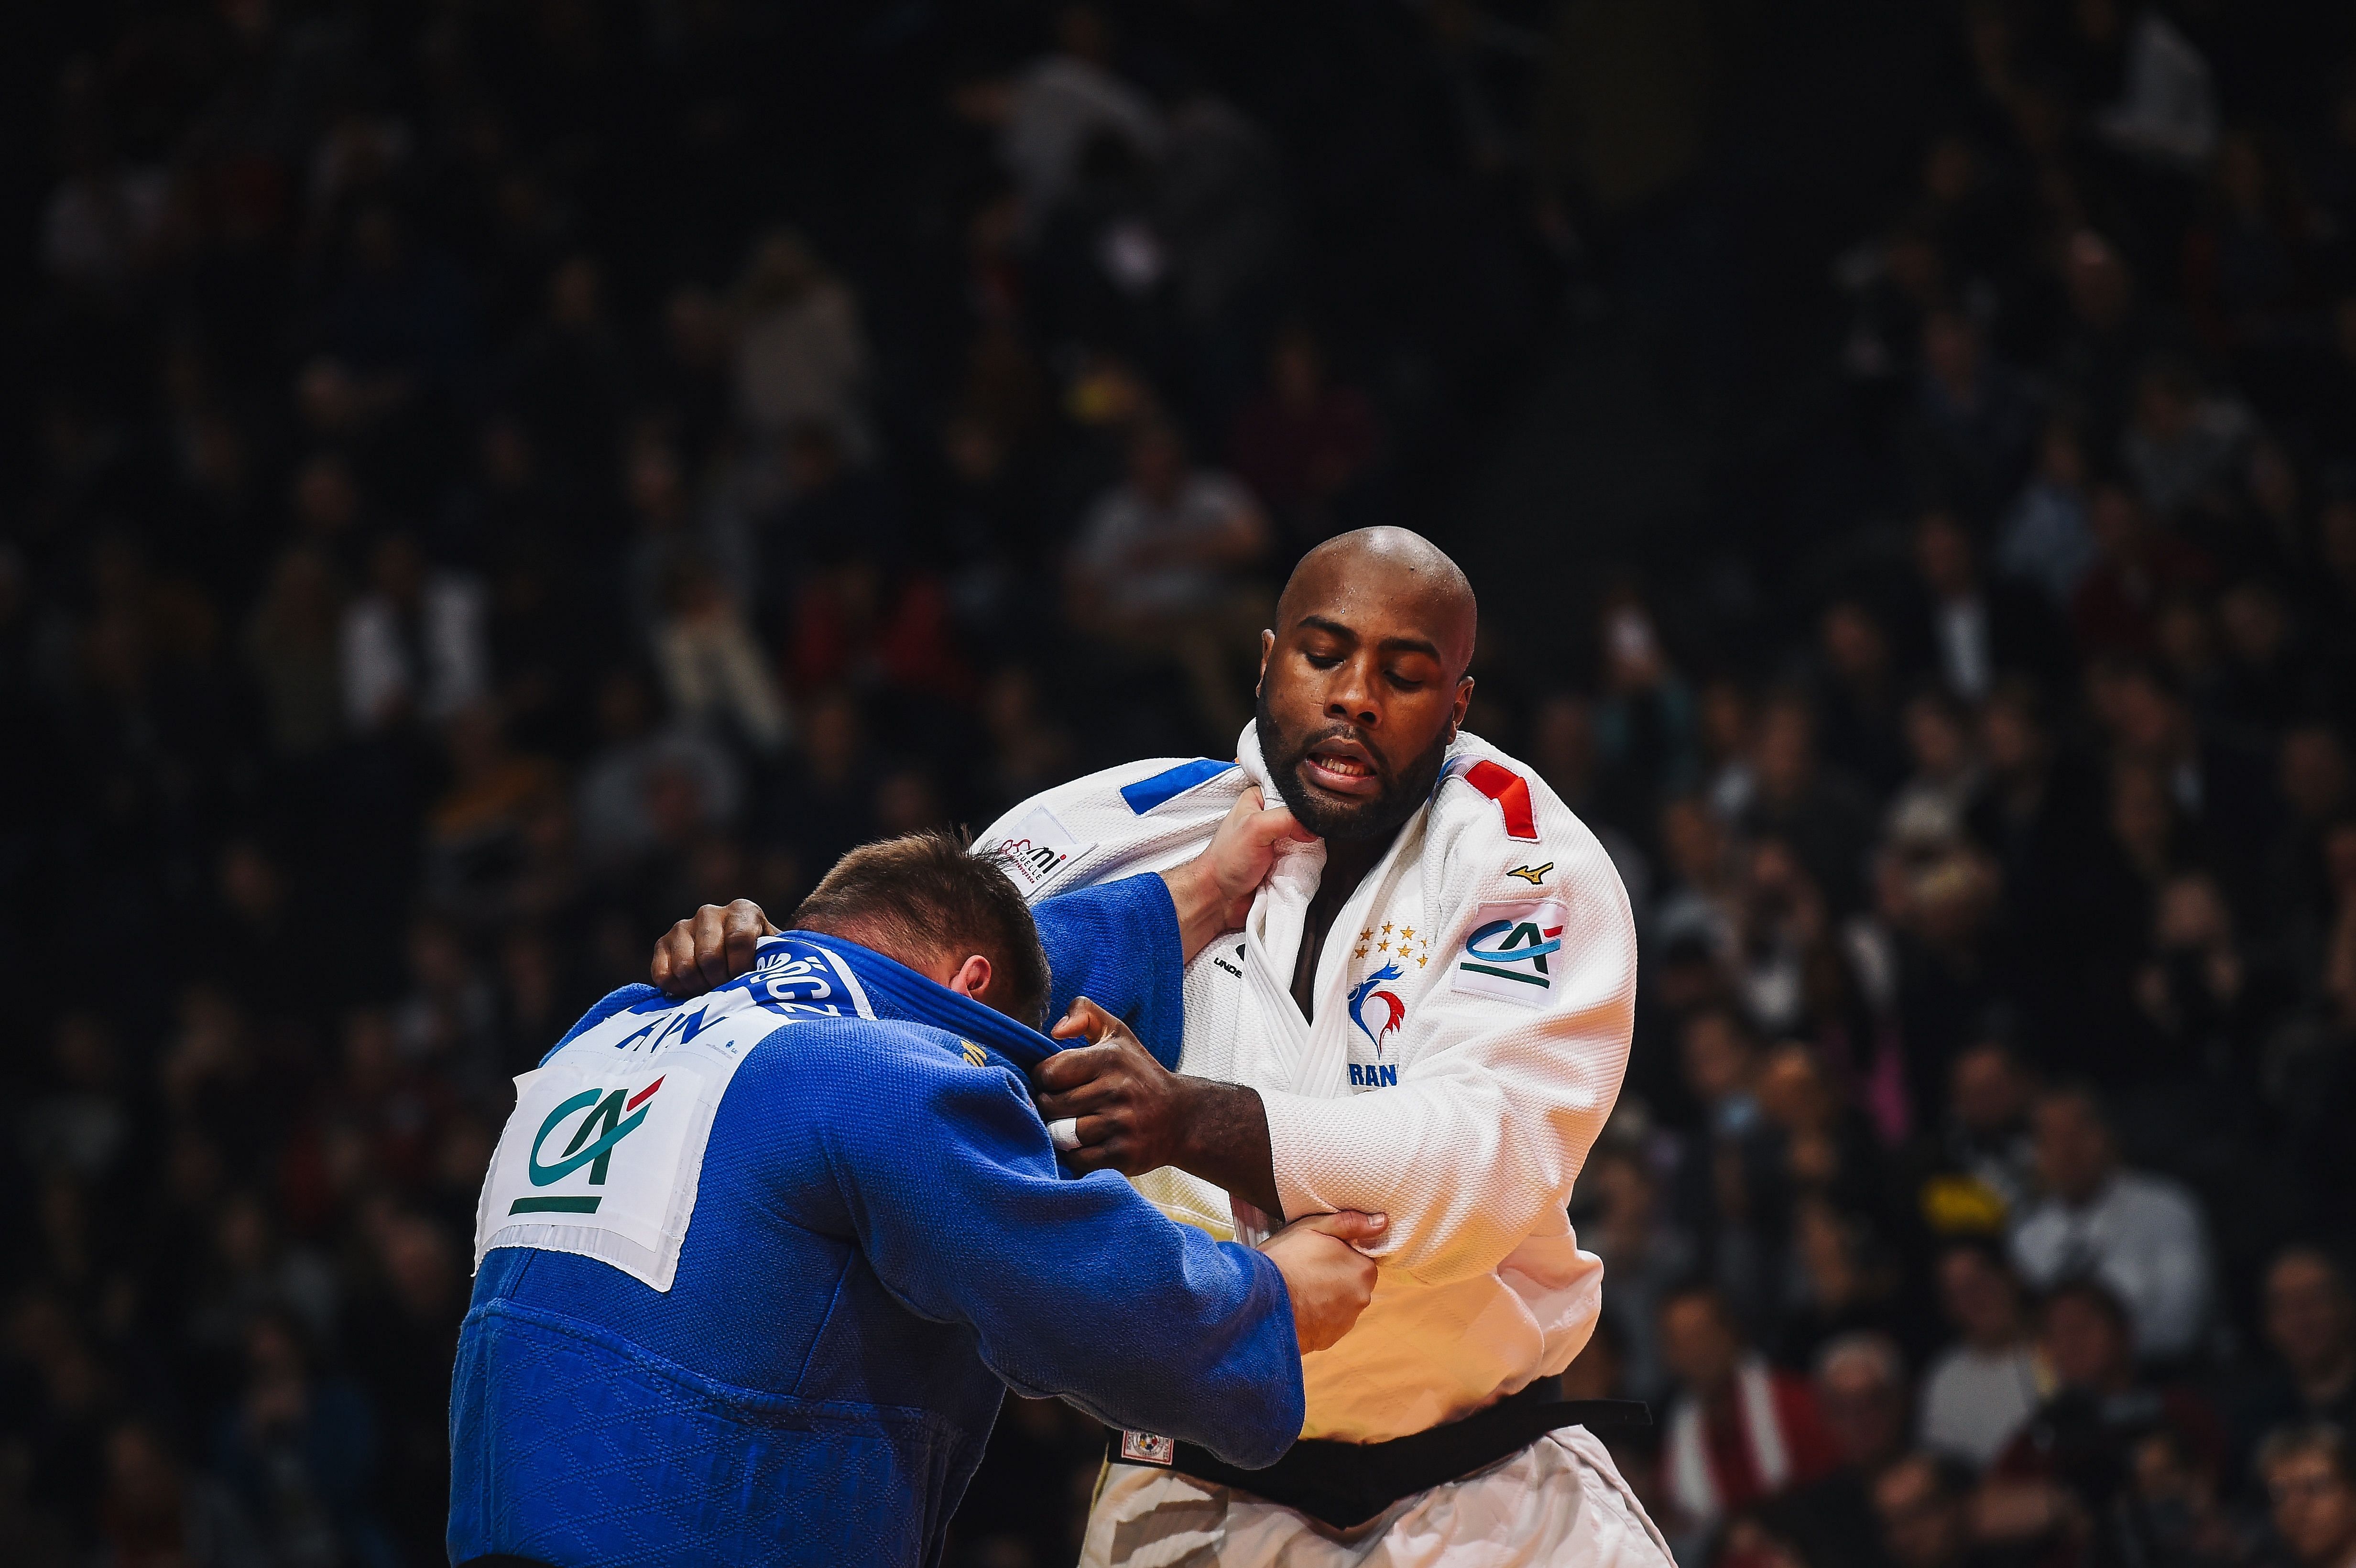 France's Teddy Riner fights against Hungarian Richard Sipocz during a men's over 100 kg category fight at the Judo Paris Grand Slam 2020, in Paris. (AFP Photo)